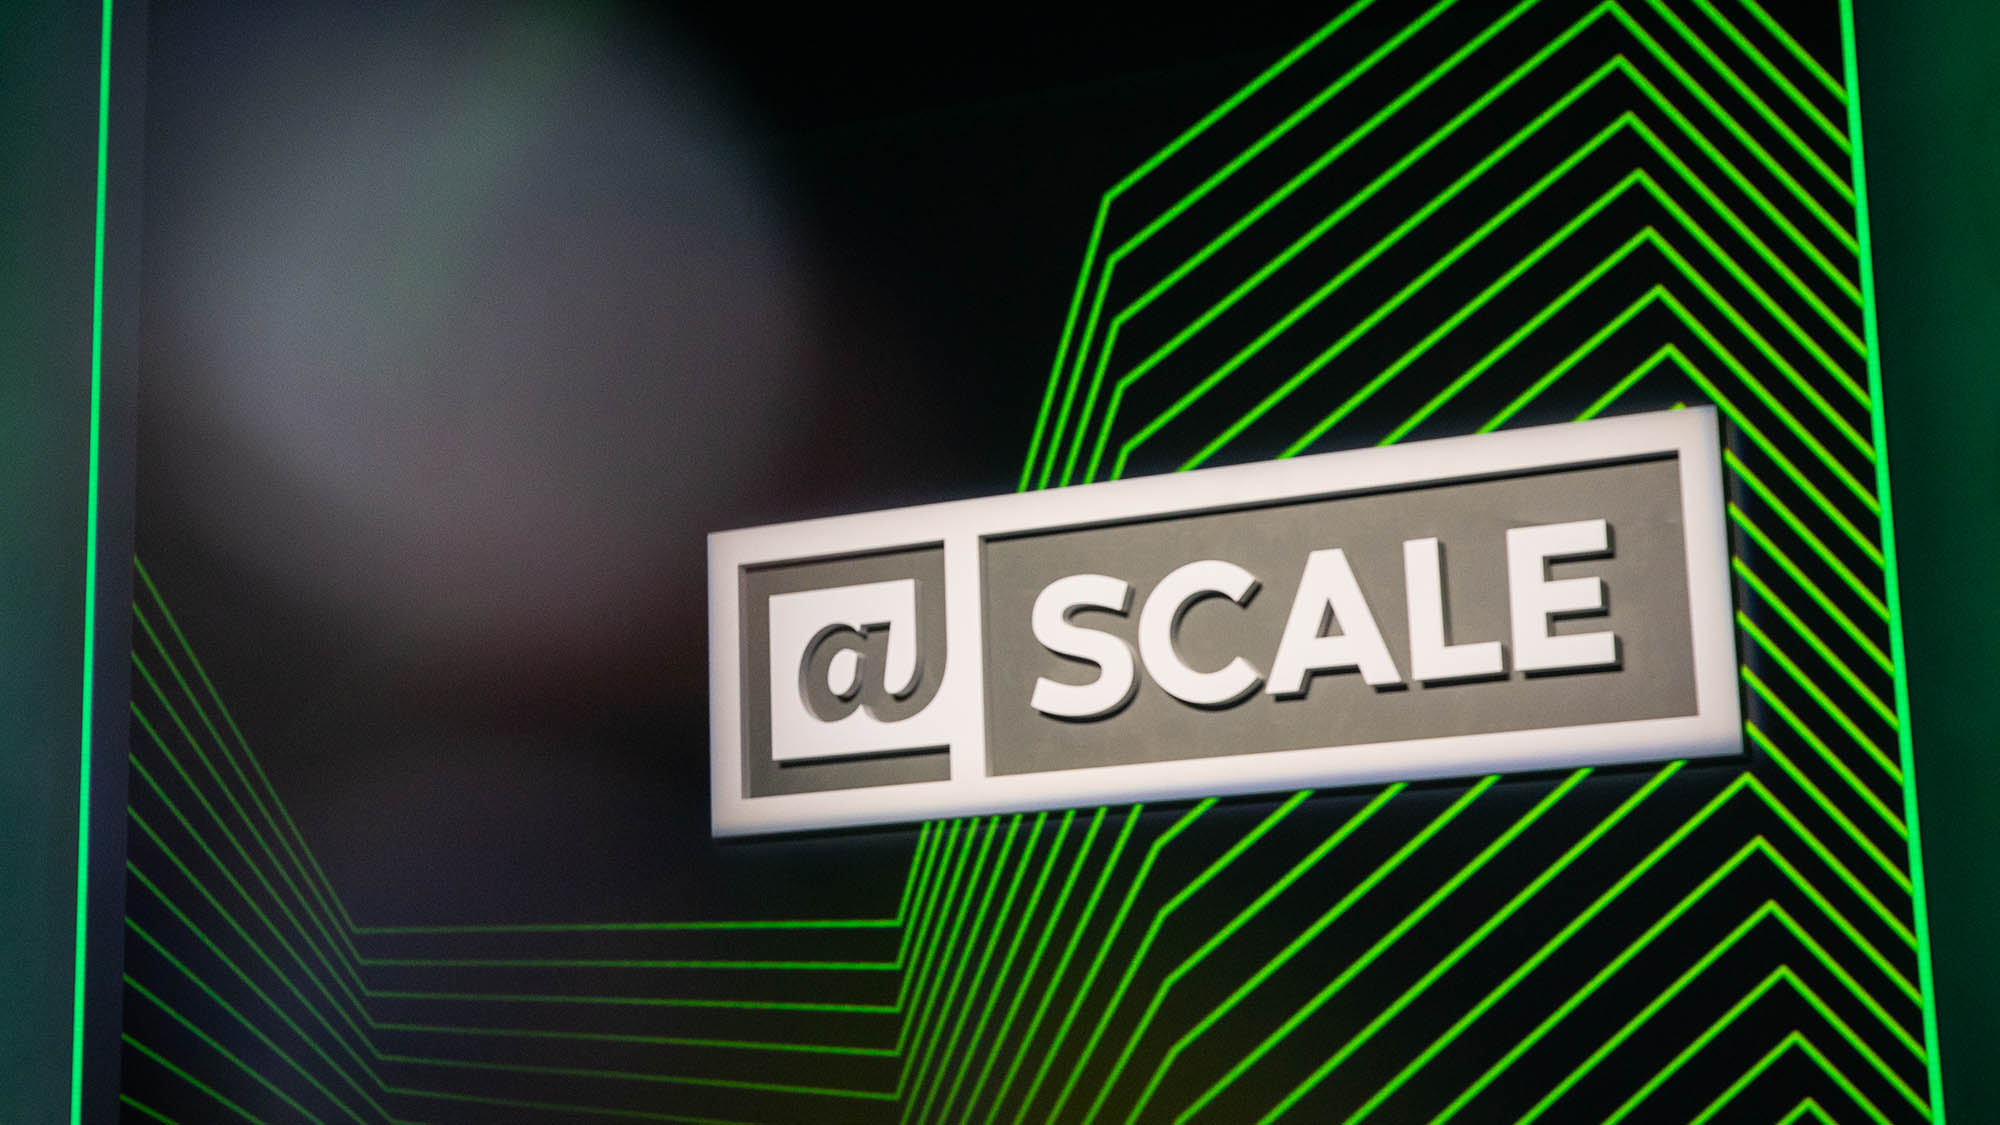 Register now for @Scale 2019!